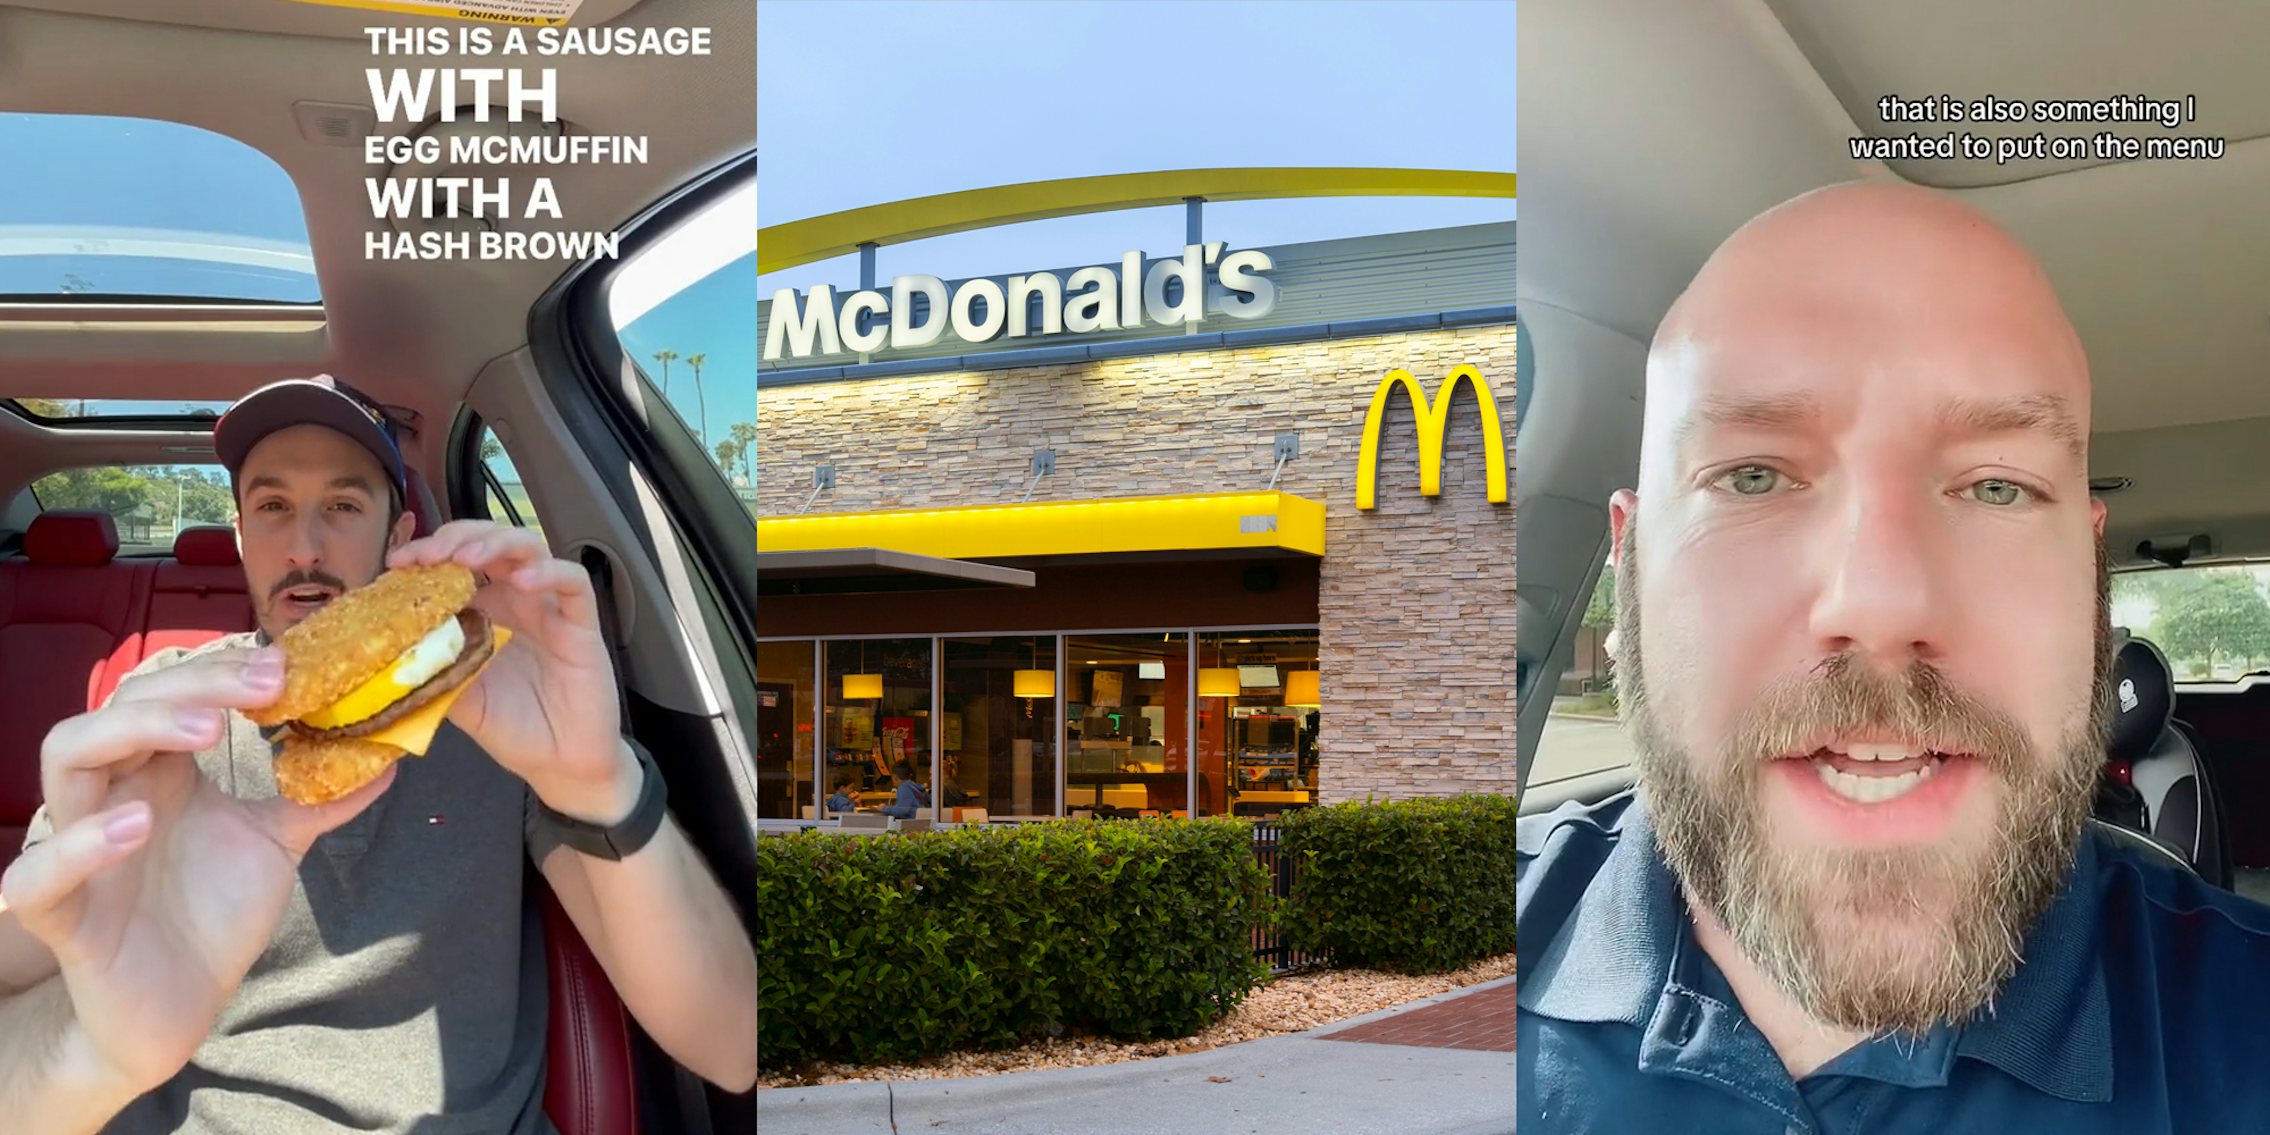 McDonald's customer speaking in car holding sausage egg mcmuffin with hash brown with caption 'THIS IS A SAUSAGE WITH EGG MCMUFFIN WITH A HASH BROWN' (l) McDonald's building with signs (c) former McDonald's corporate chef speaking in car with caption 'that is also something I wanted to put on the menu' (r)